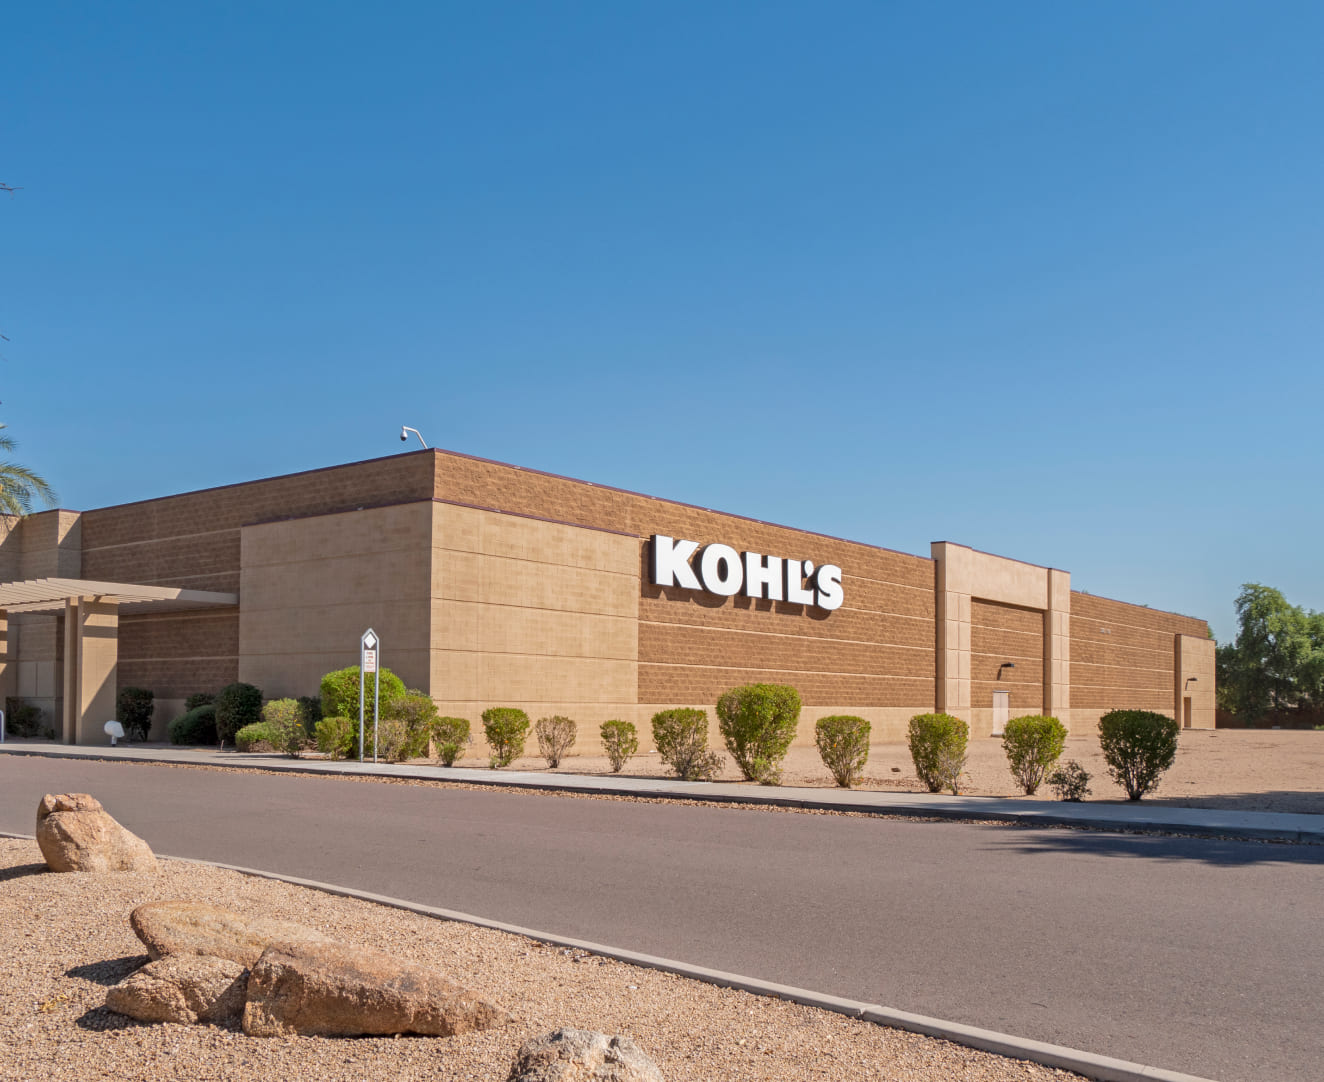 Another view of the side of the building that houses Kohl's at 1161 N. Dysart Road in Avondale, AZ.